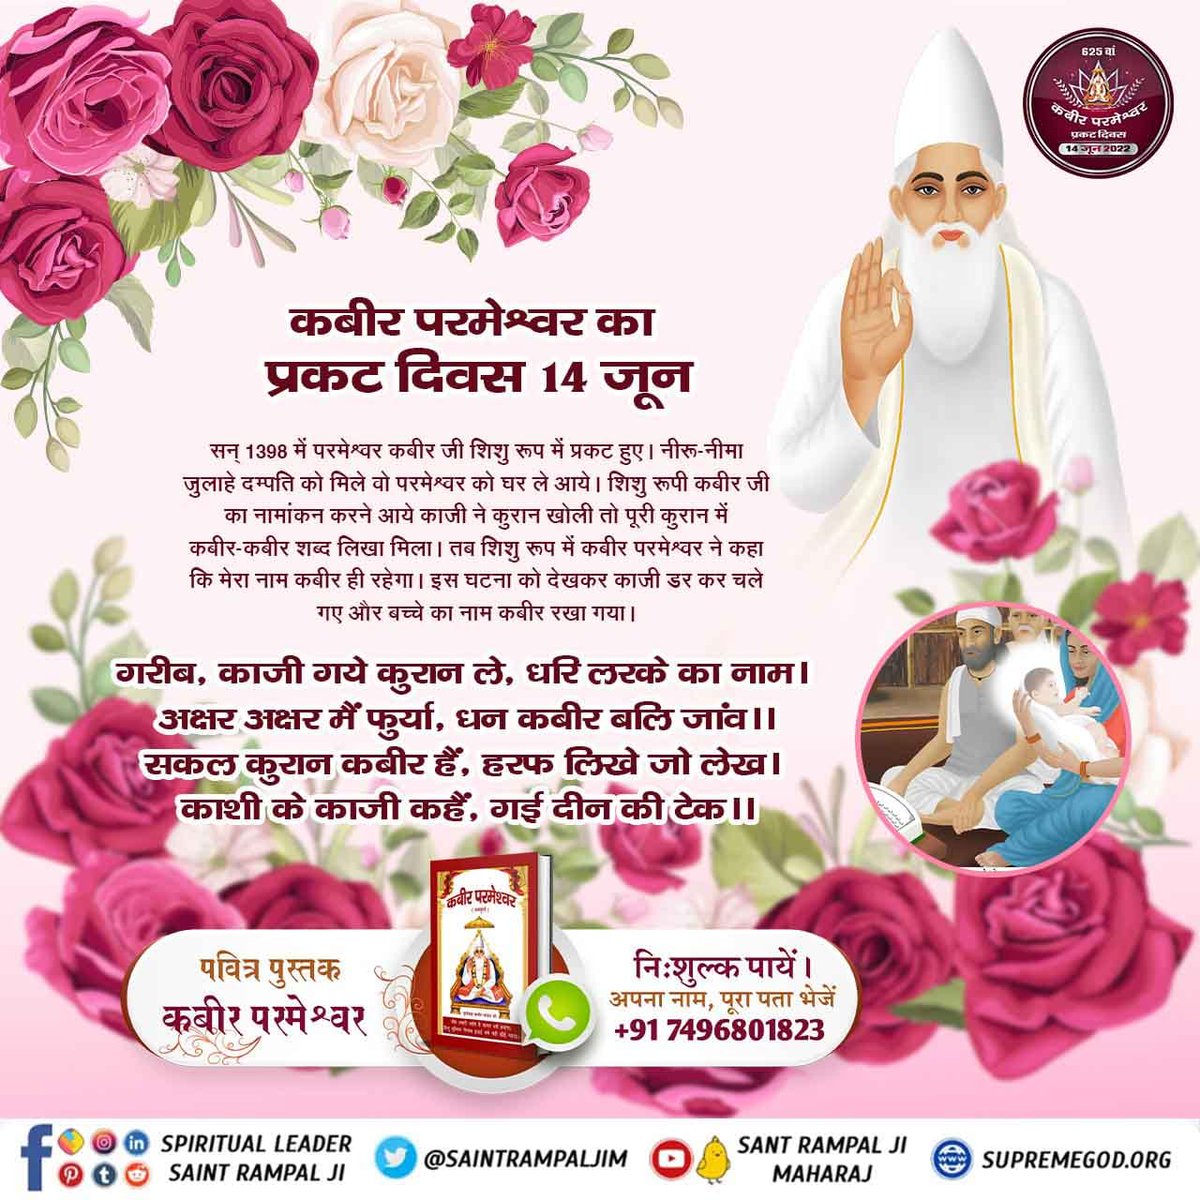 #2DaysLeftForKabirPrakatDiwas
When the Qazis, who came to name the God Kabir in the child form, opened the QuranSharif, then all the letters in the QuranSharif became Kabir-Kabir-Kabir.Then GodKabir said in the form of a child,O Kajis of Kashi am KabirAllah,keep my name'Kabir'.